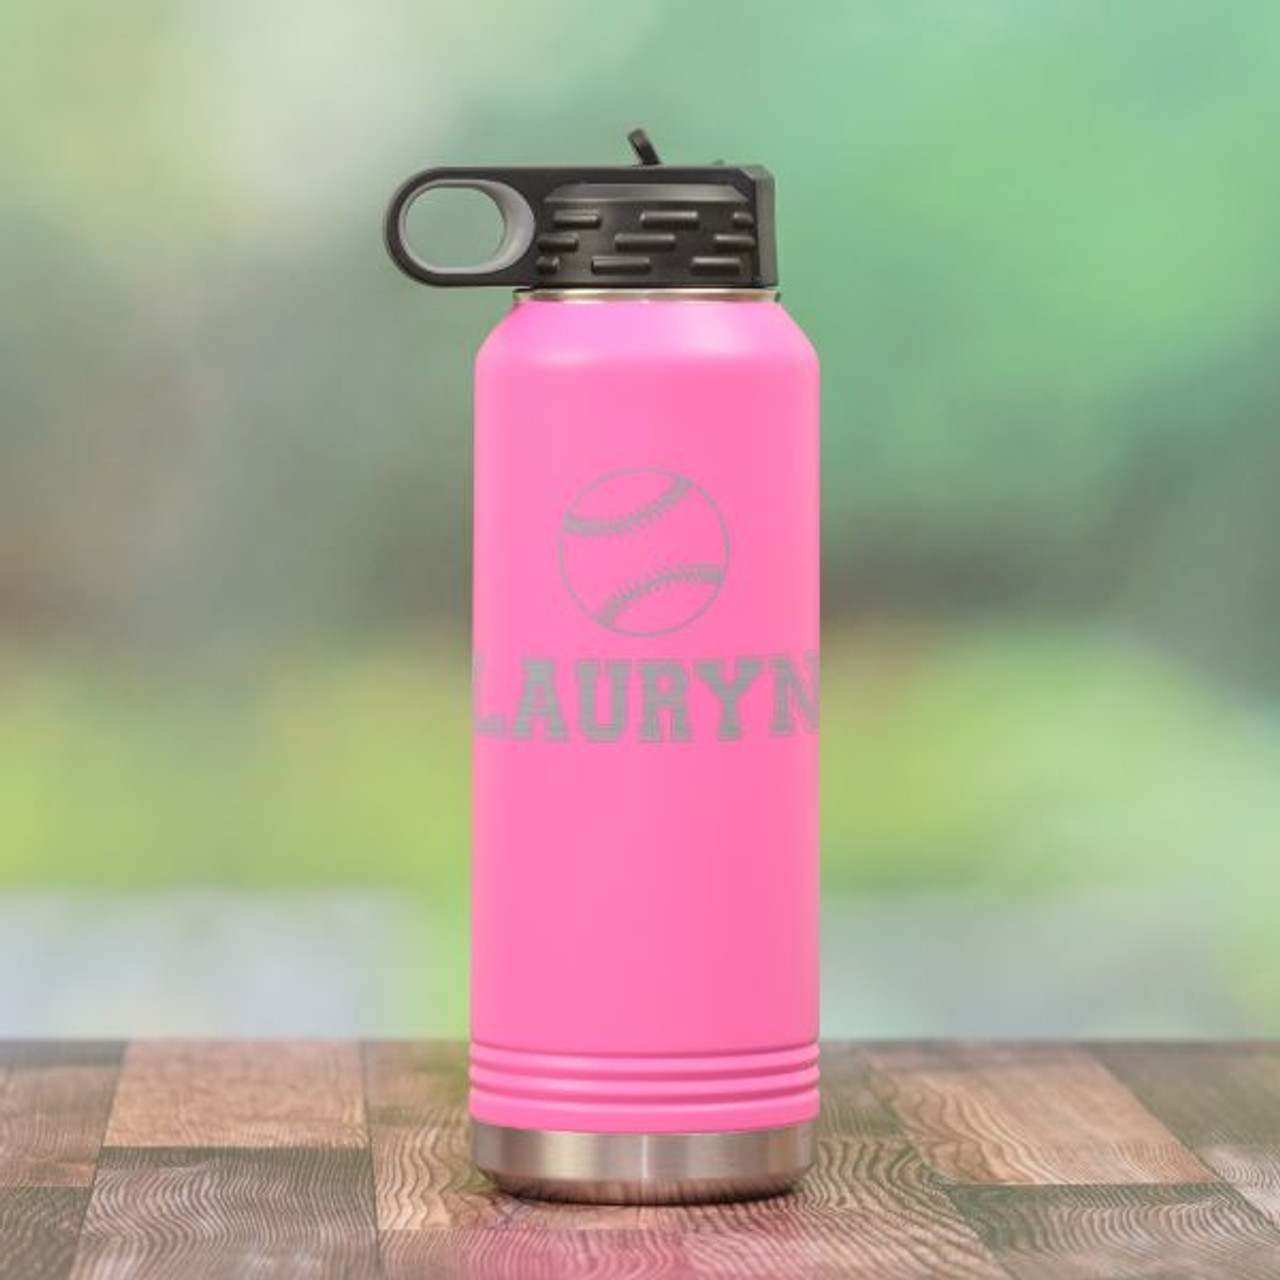 https://cdn11.bigcommerce.com/s-mdwz5t7wme/images/stencil/1280x1280/products/1600/6262/DW5049-Softball-waterbottle__18360.1700691014.jpg?c=2?imbypass=on